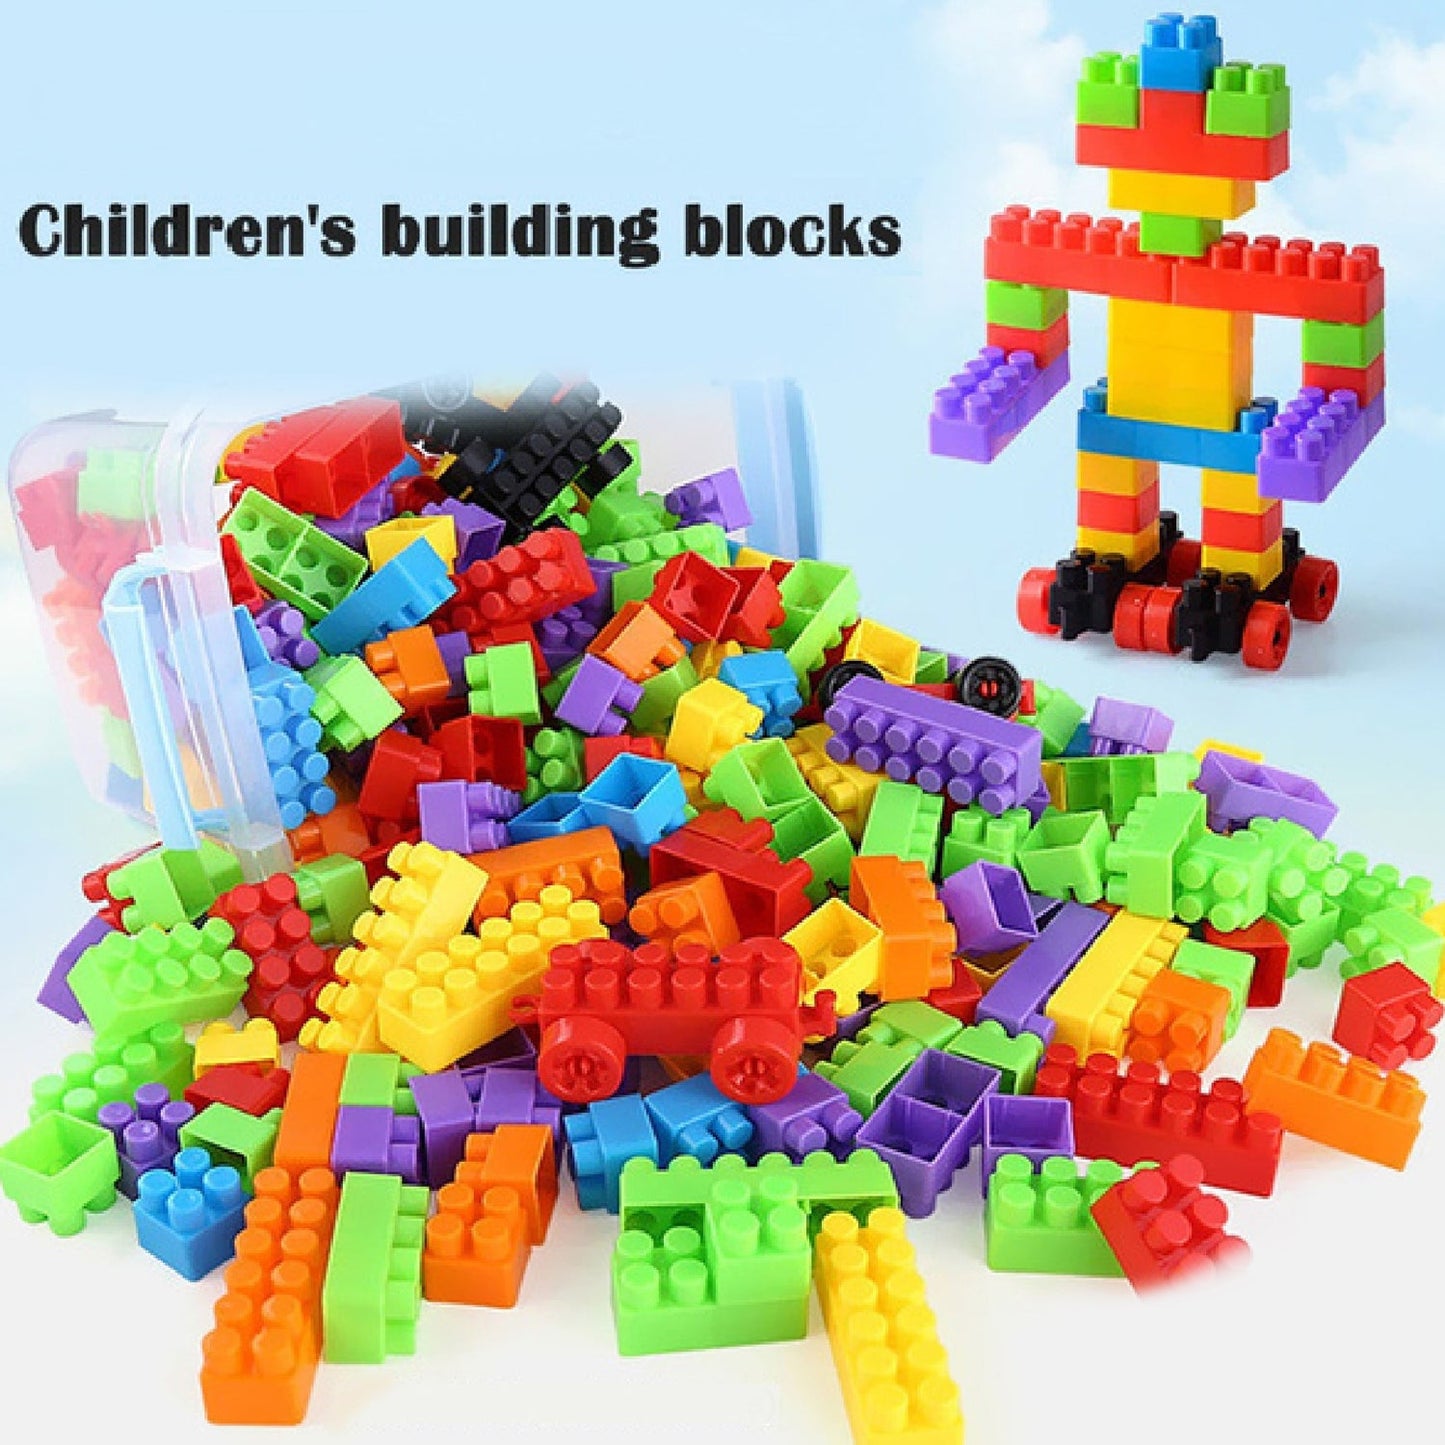 8076 100pc Building Blocks Early Learning Educational Toy for Kids 